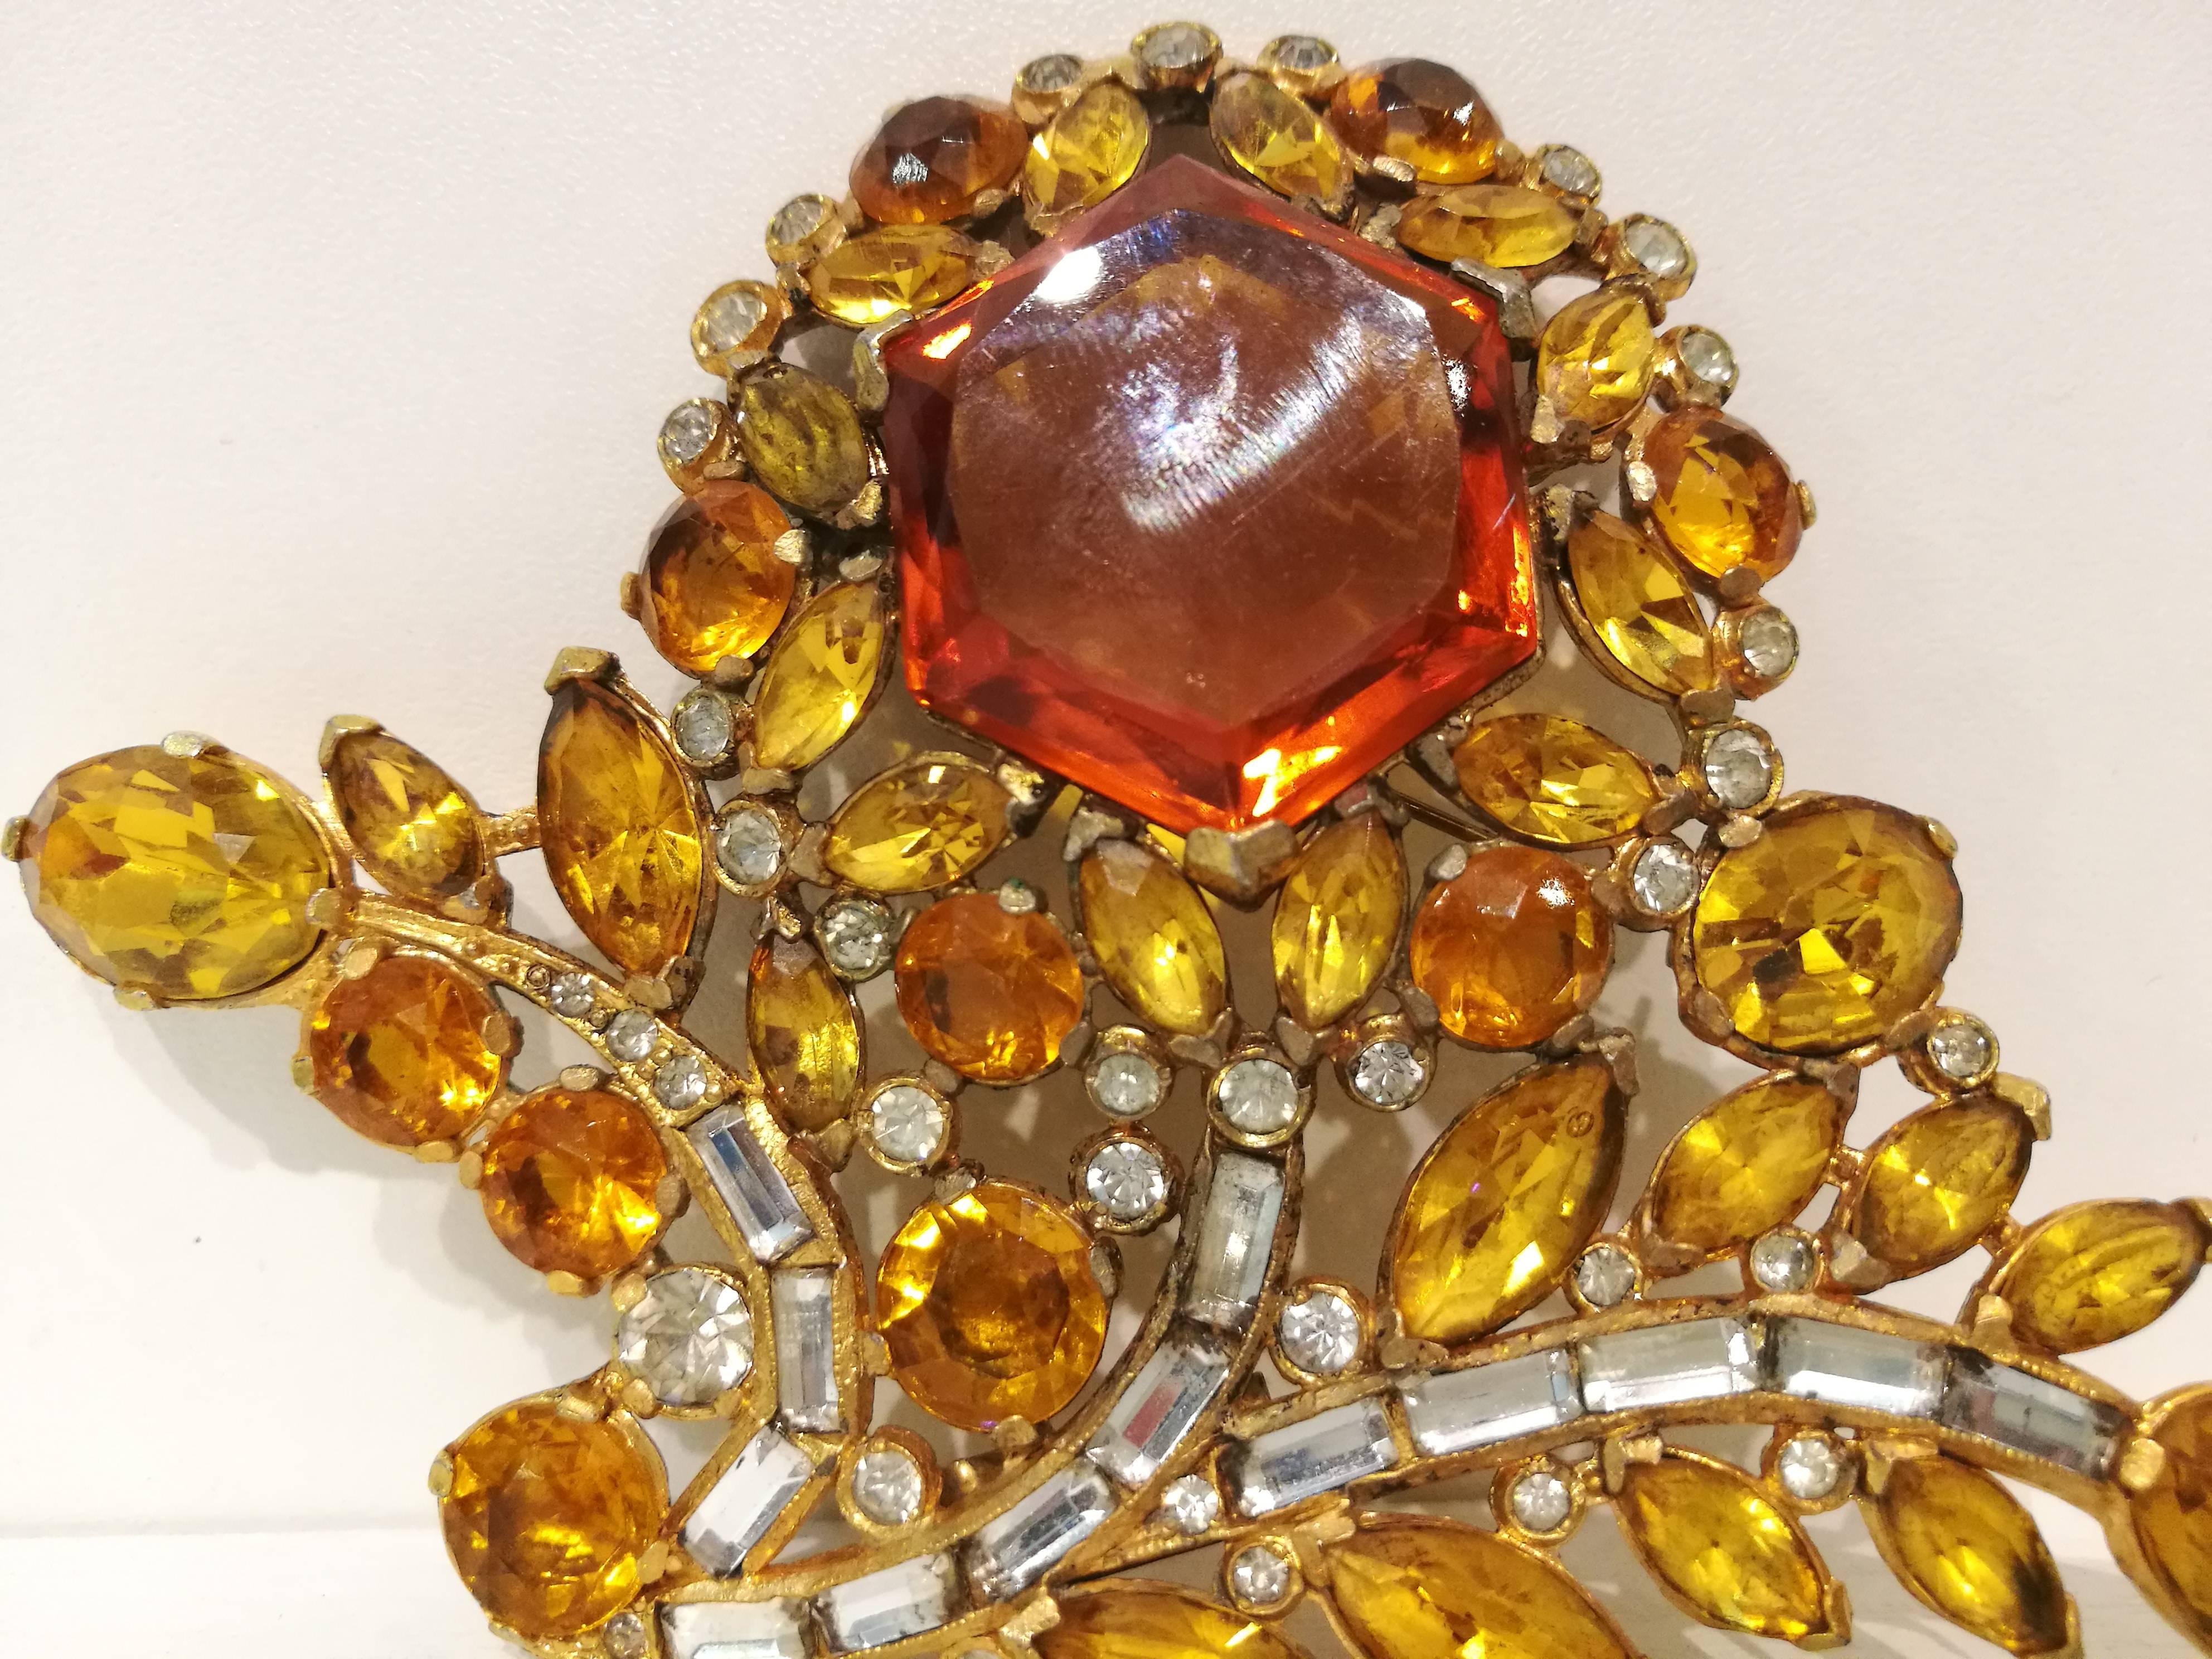 1980s Eisenberg Pin Brooch

Rare and unique gold tone with amber tone stone

wodht 11cm
lenght 8cm